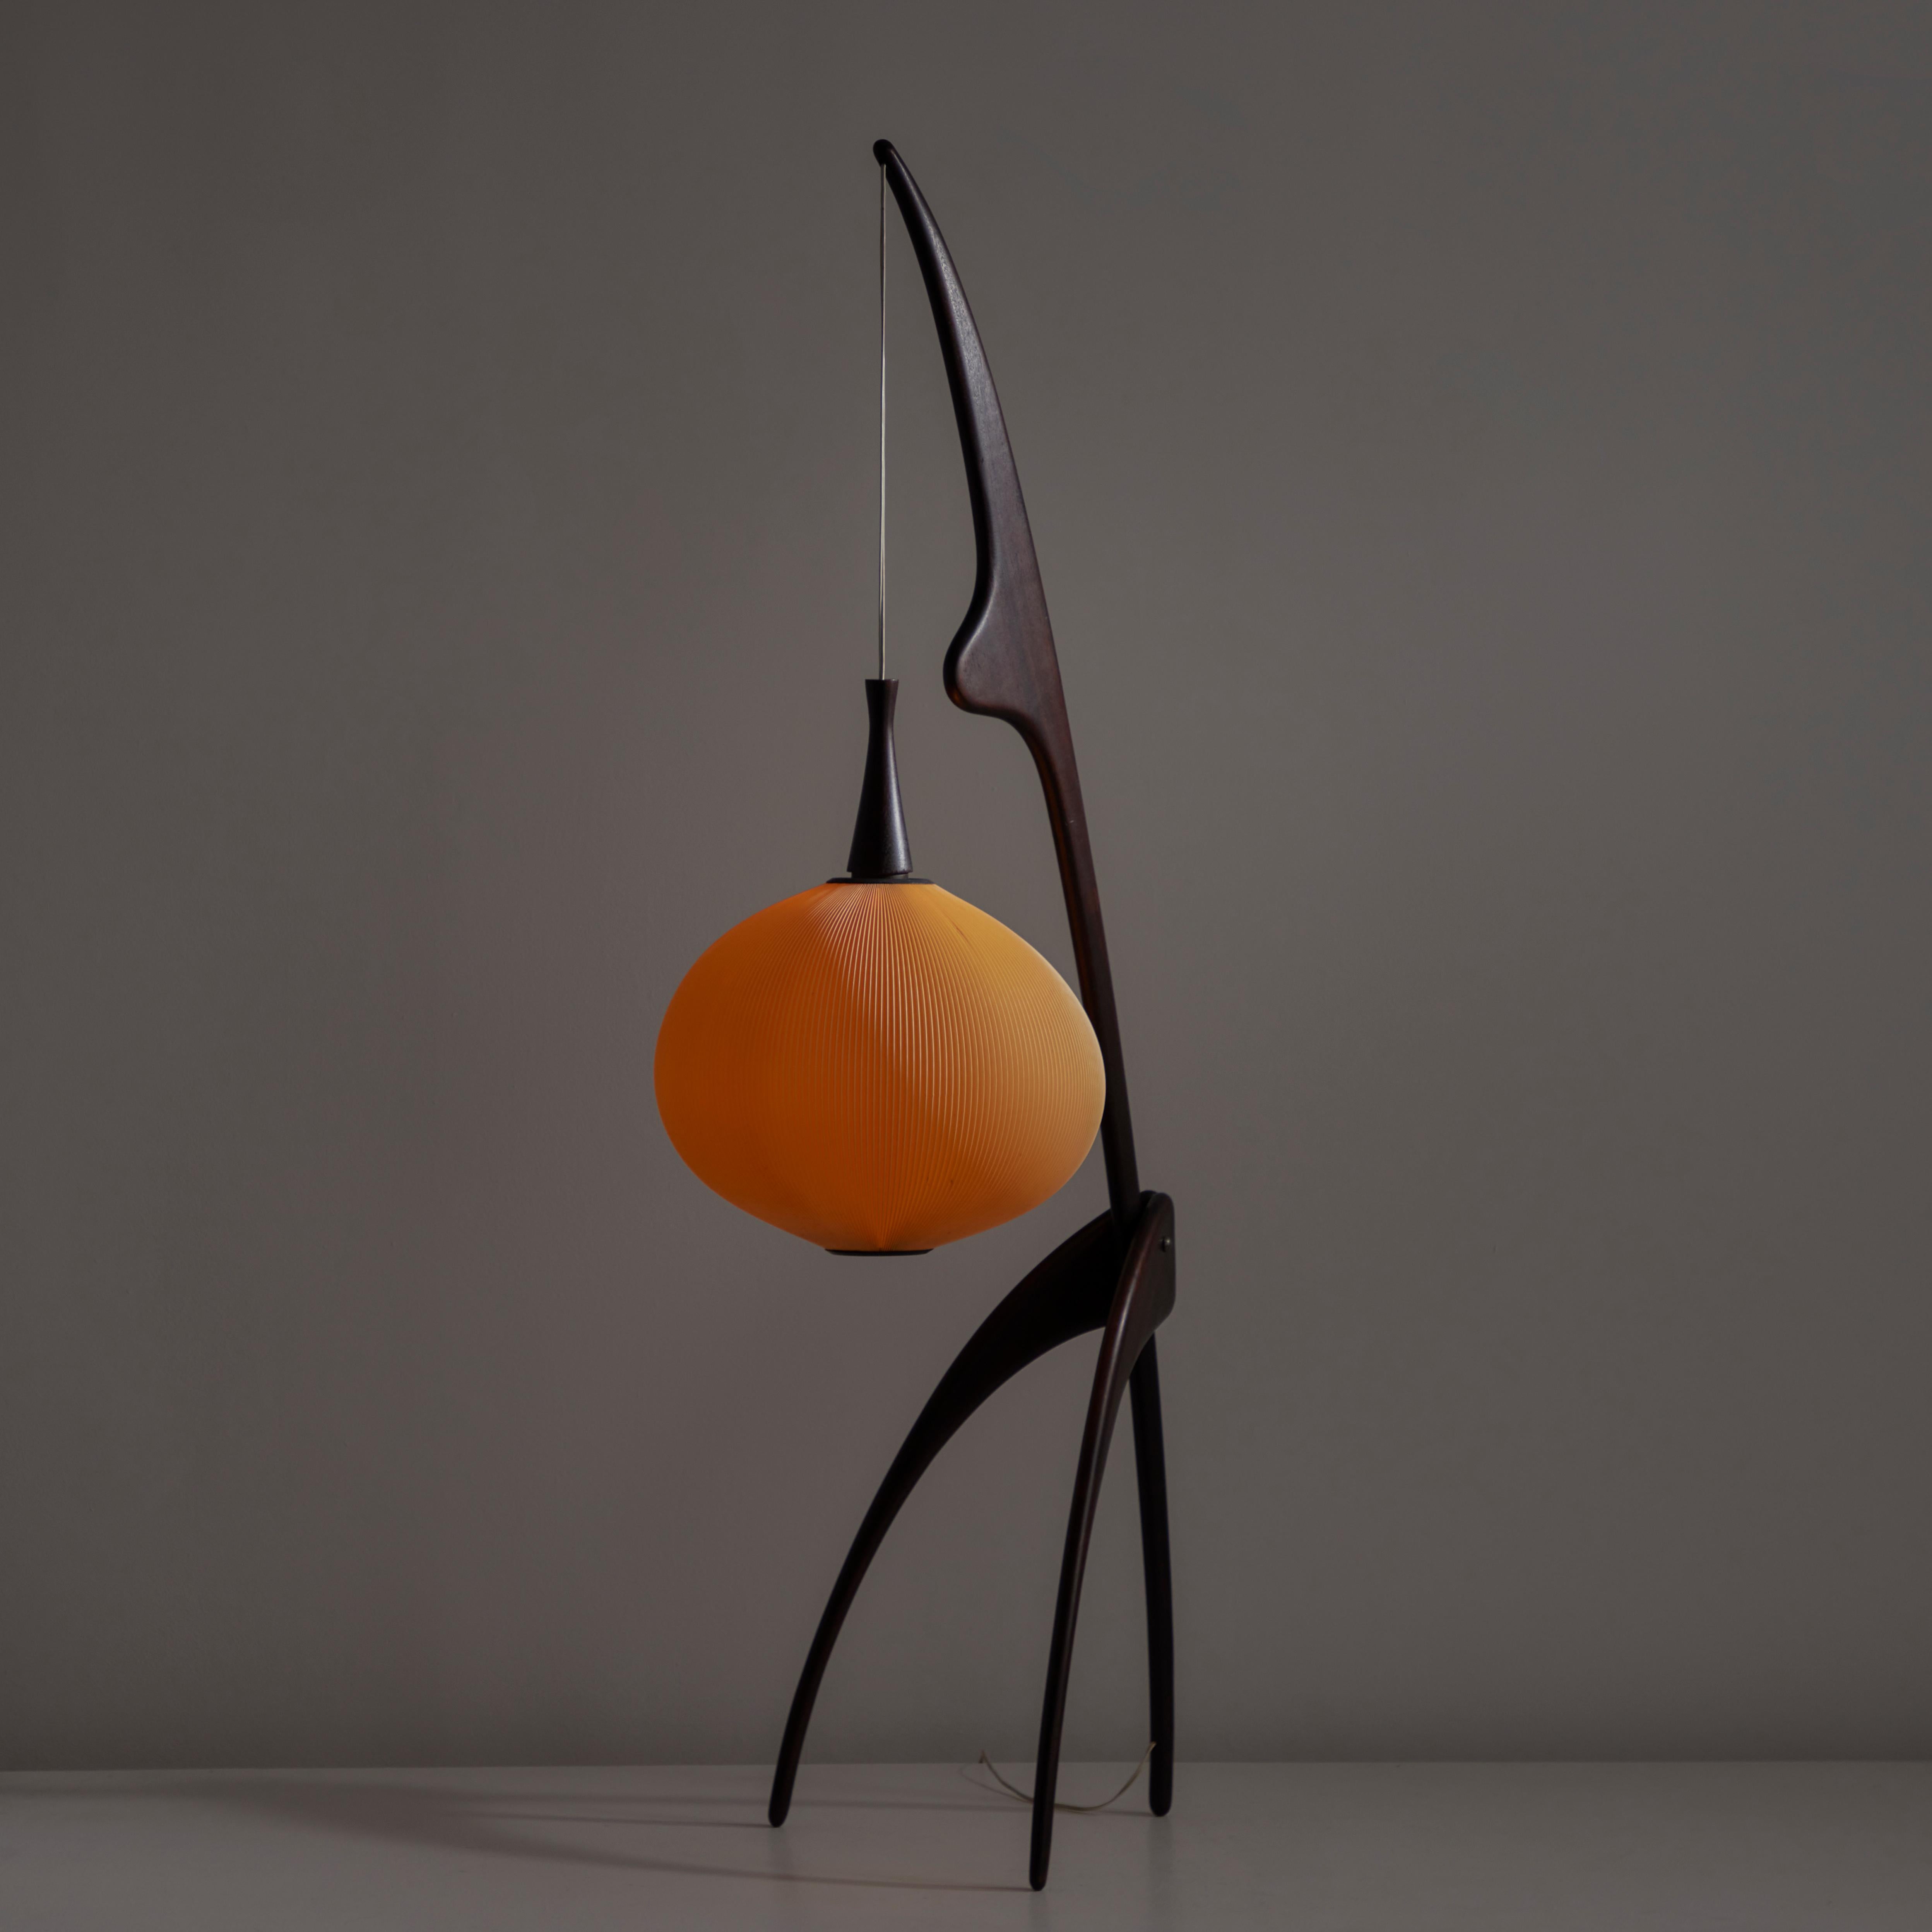 Model 14.950 'Praying Mantis' Floor Lamp by Rispal. Designed and manufactured in France, circa 1950. Iconic and original floor lamp with a dark strained wooden frame, and insect like tri-pod legs, and suspended spherical shade fabricated from ribbed